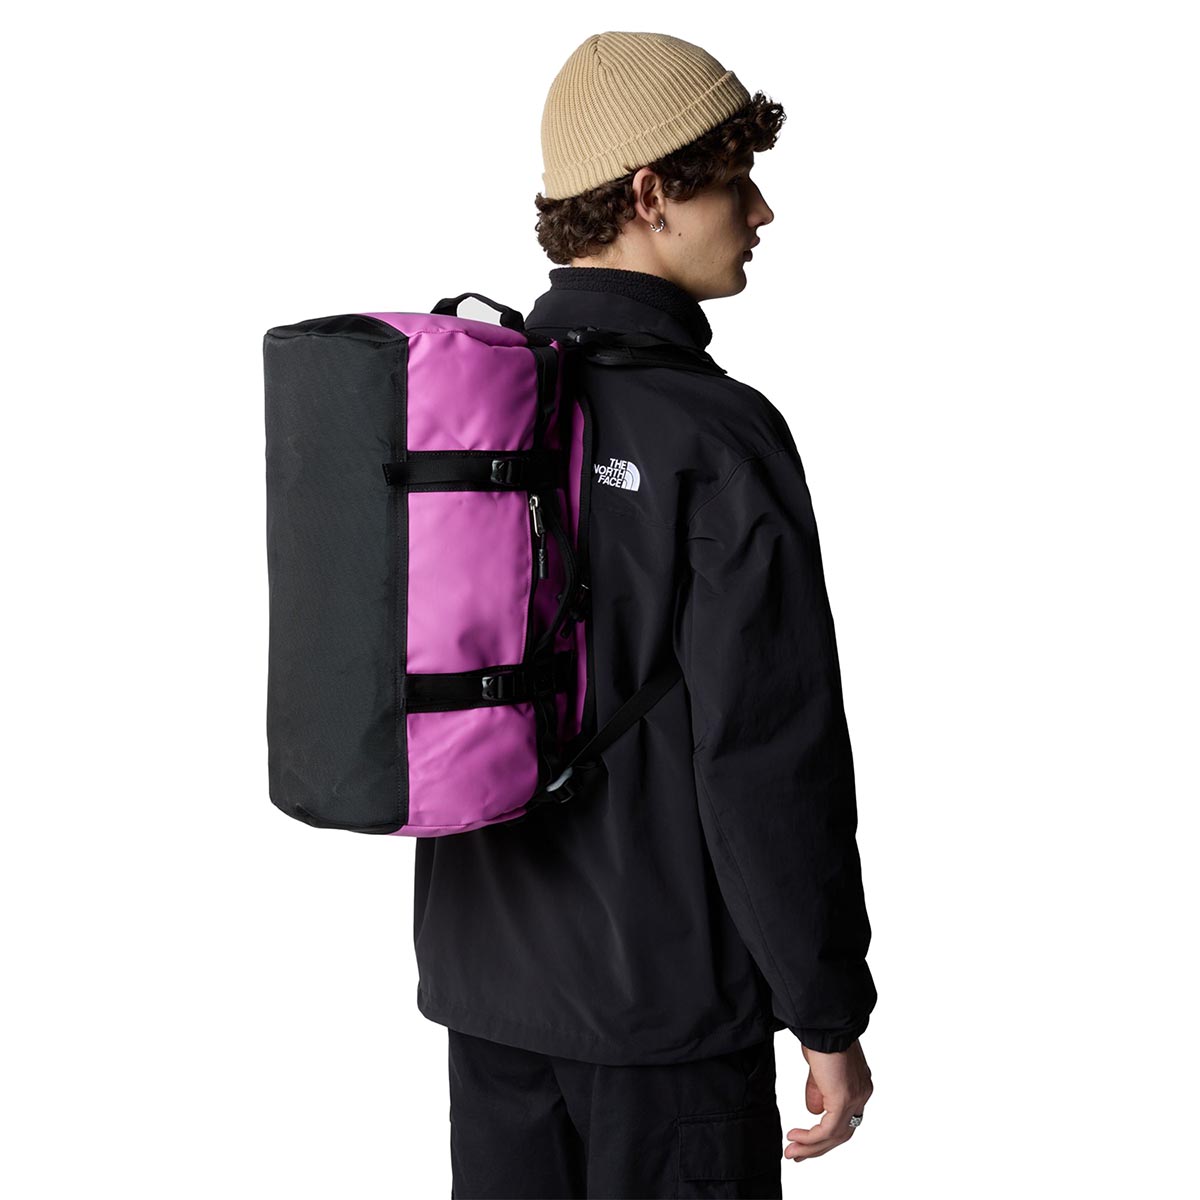 THE NORTH FACE - BASE CAMP DUFFEL - EXTRA SMALL - 31 L